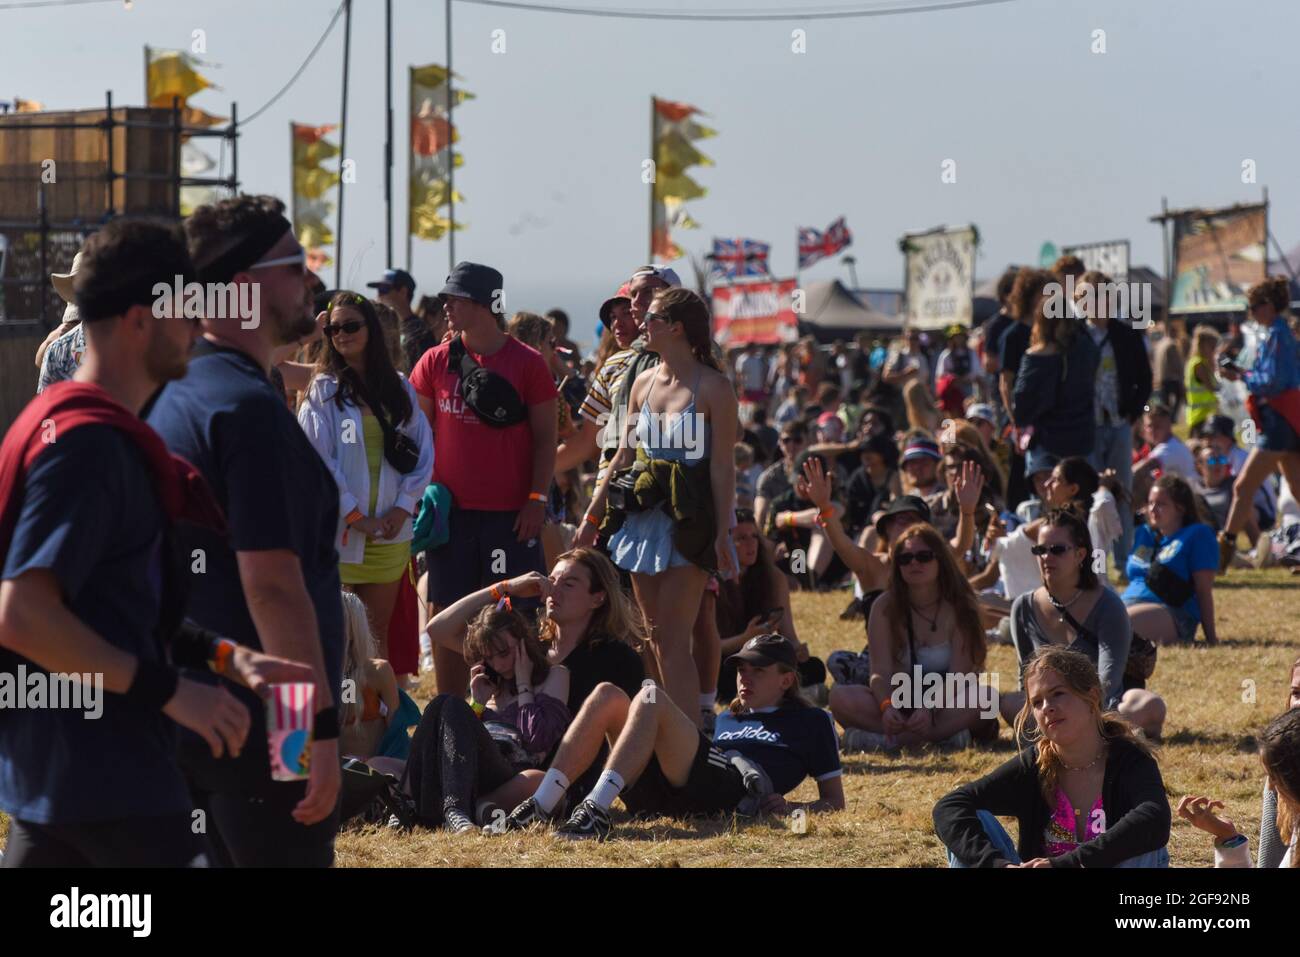 Boardmasters 2021 the surf and music festival was held 13th-15th August 2021, 40000+ people attended Boardmasters 2021 above Watergate Bay, Cornwall, UK. Stock Photo